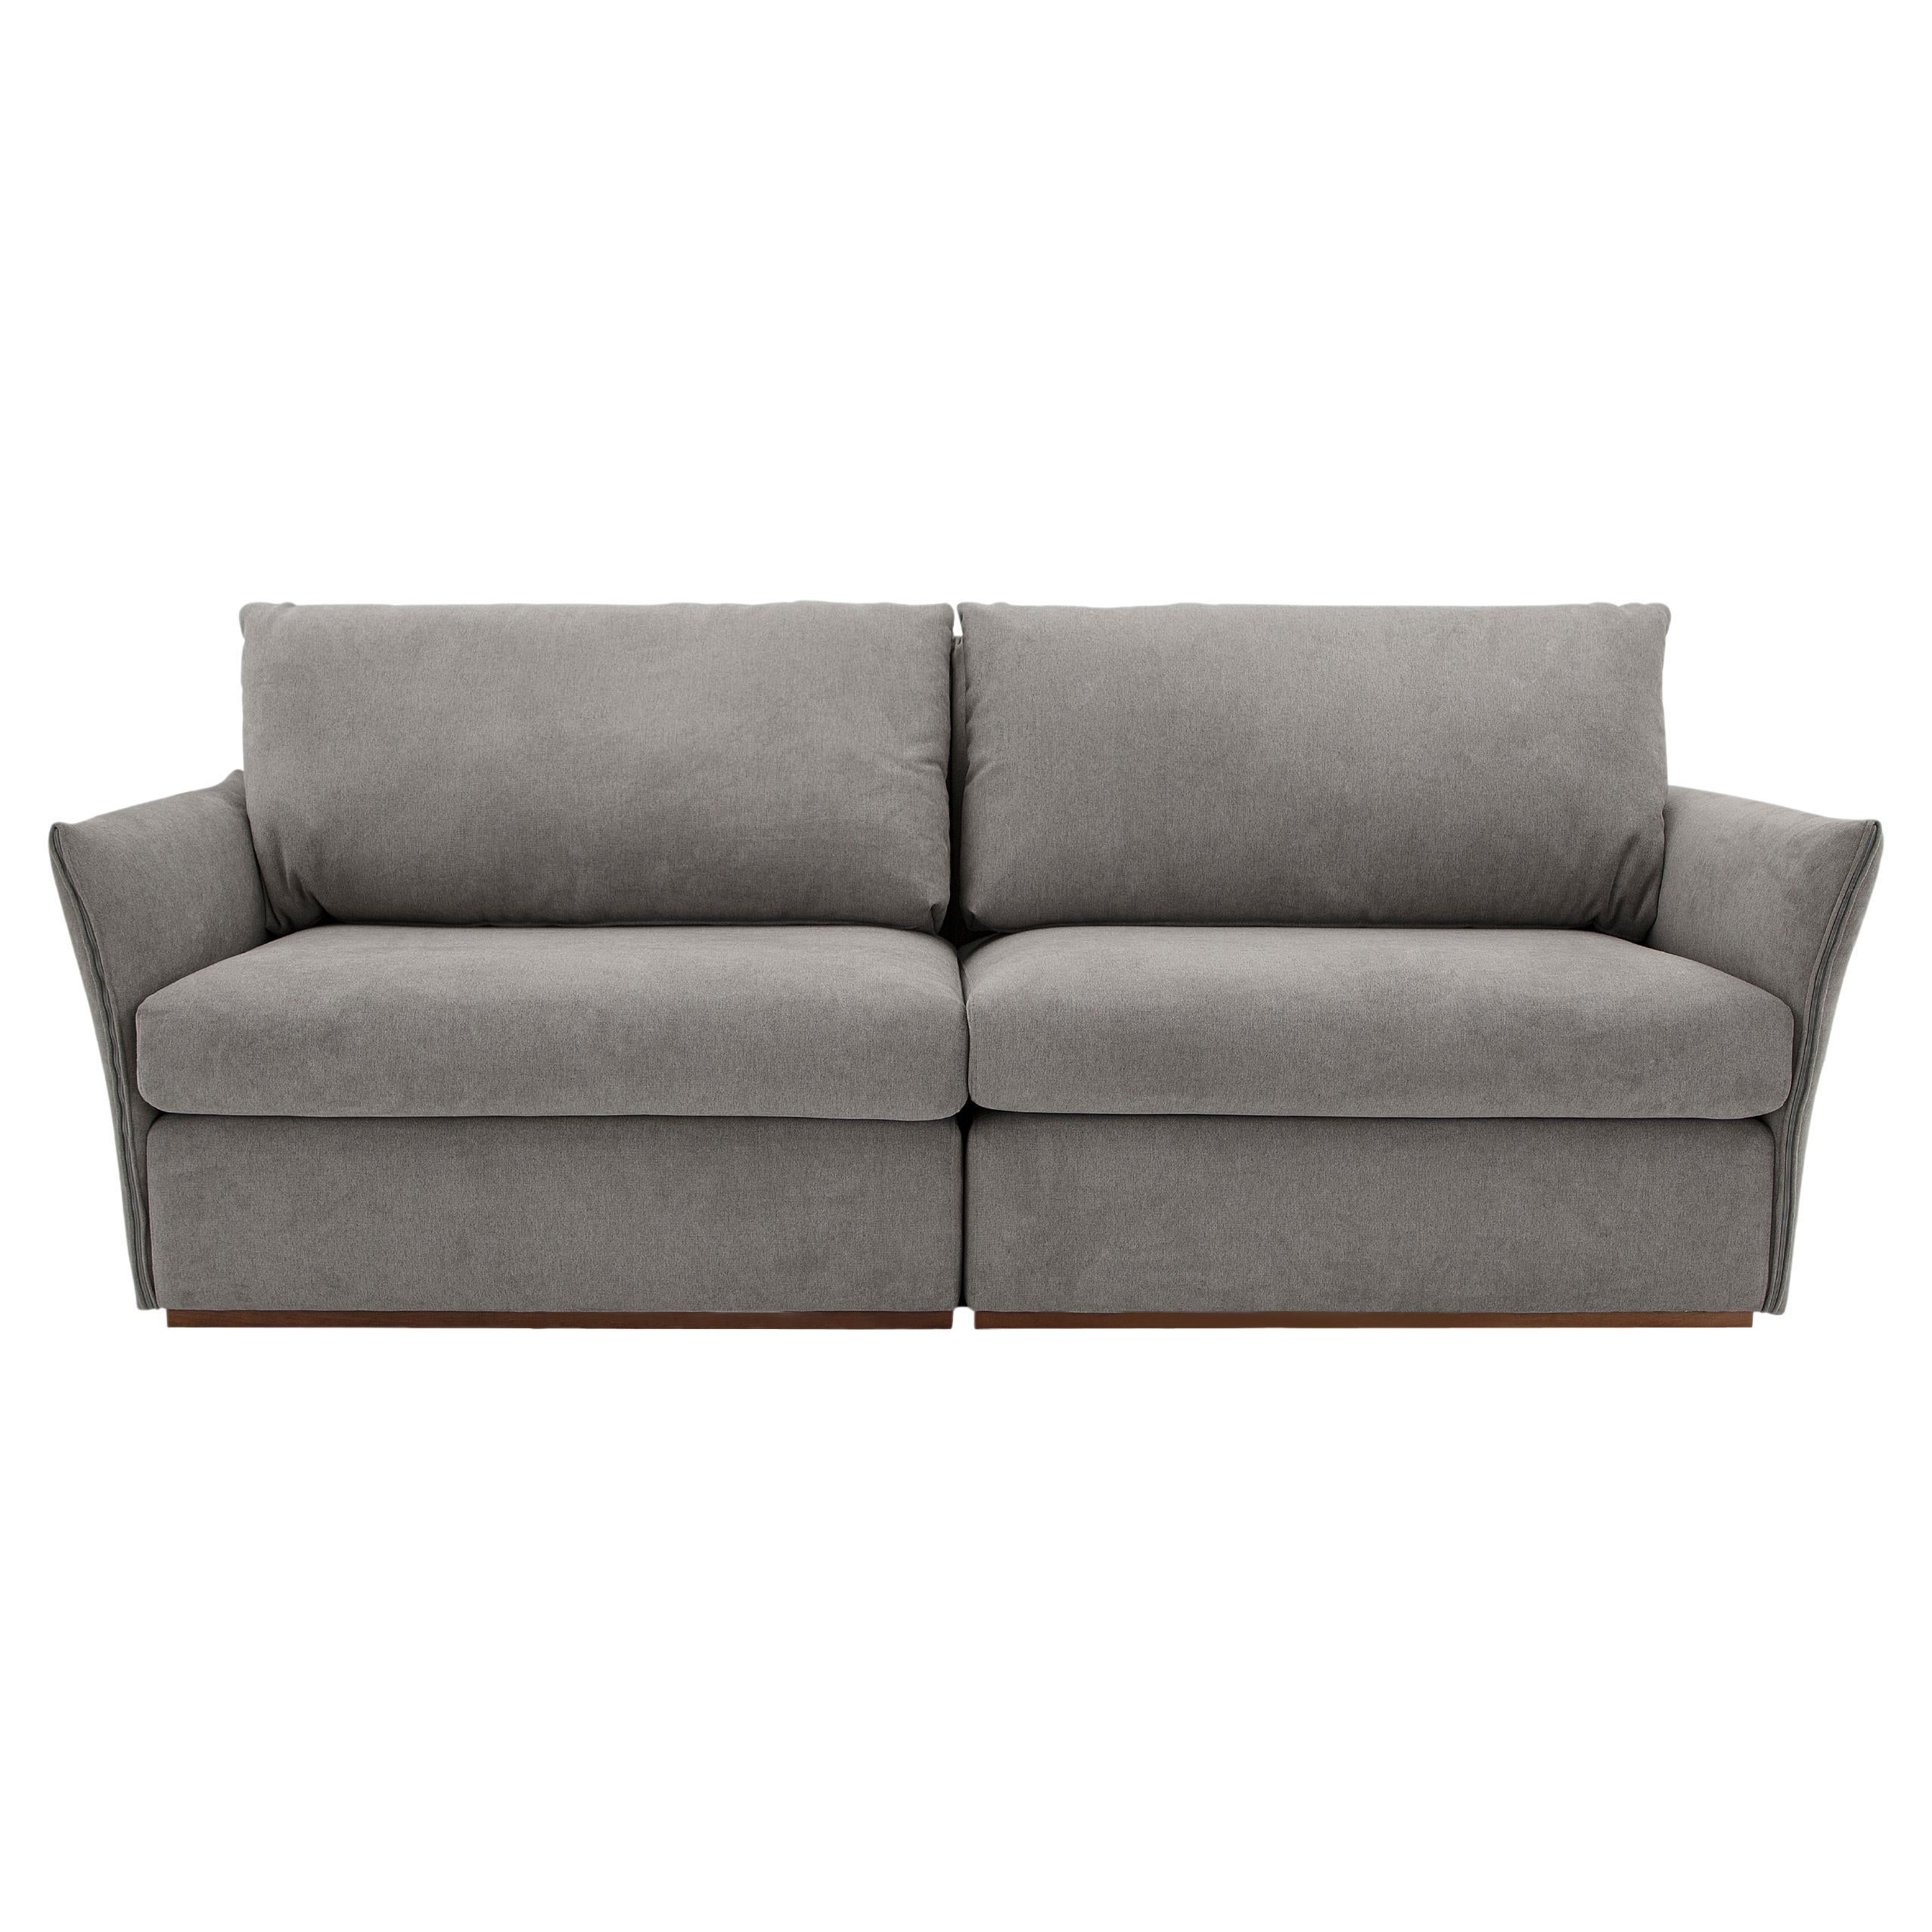 Thin Sofa with Bowed Arms in an Upholstered Gray Fabric For Sale